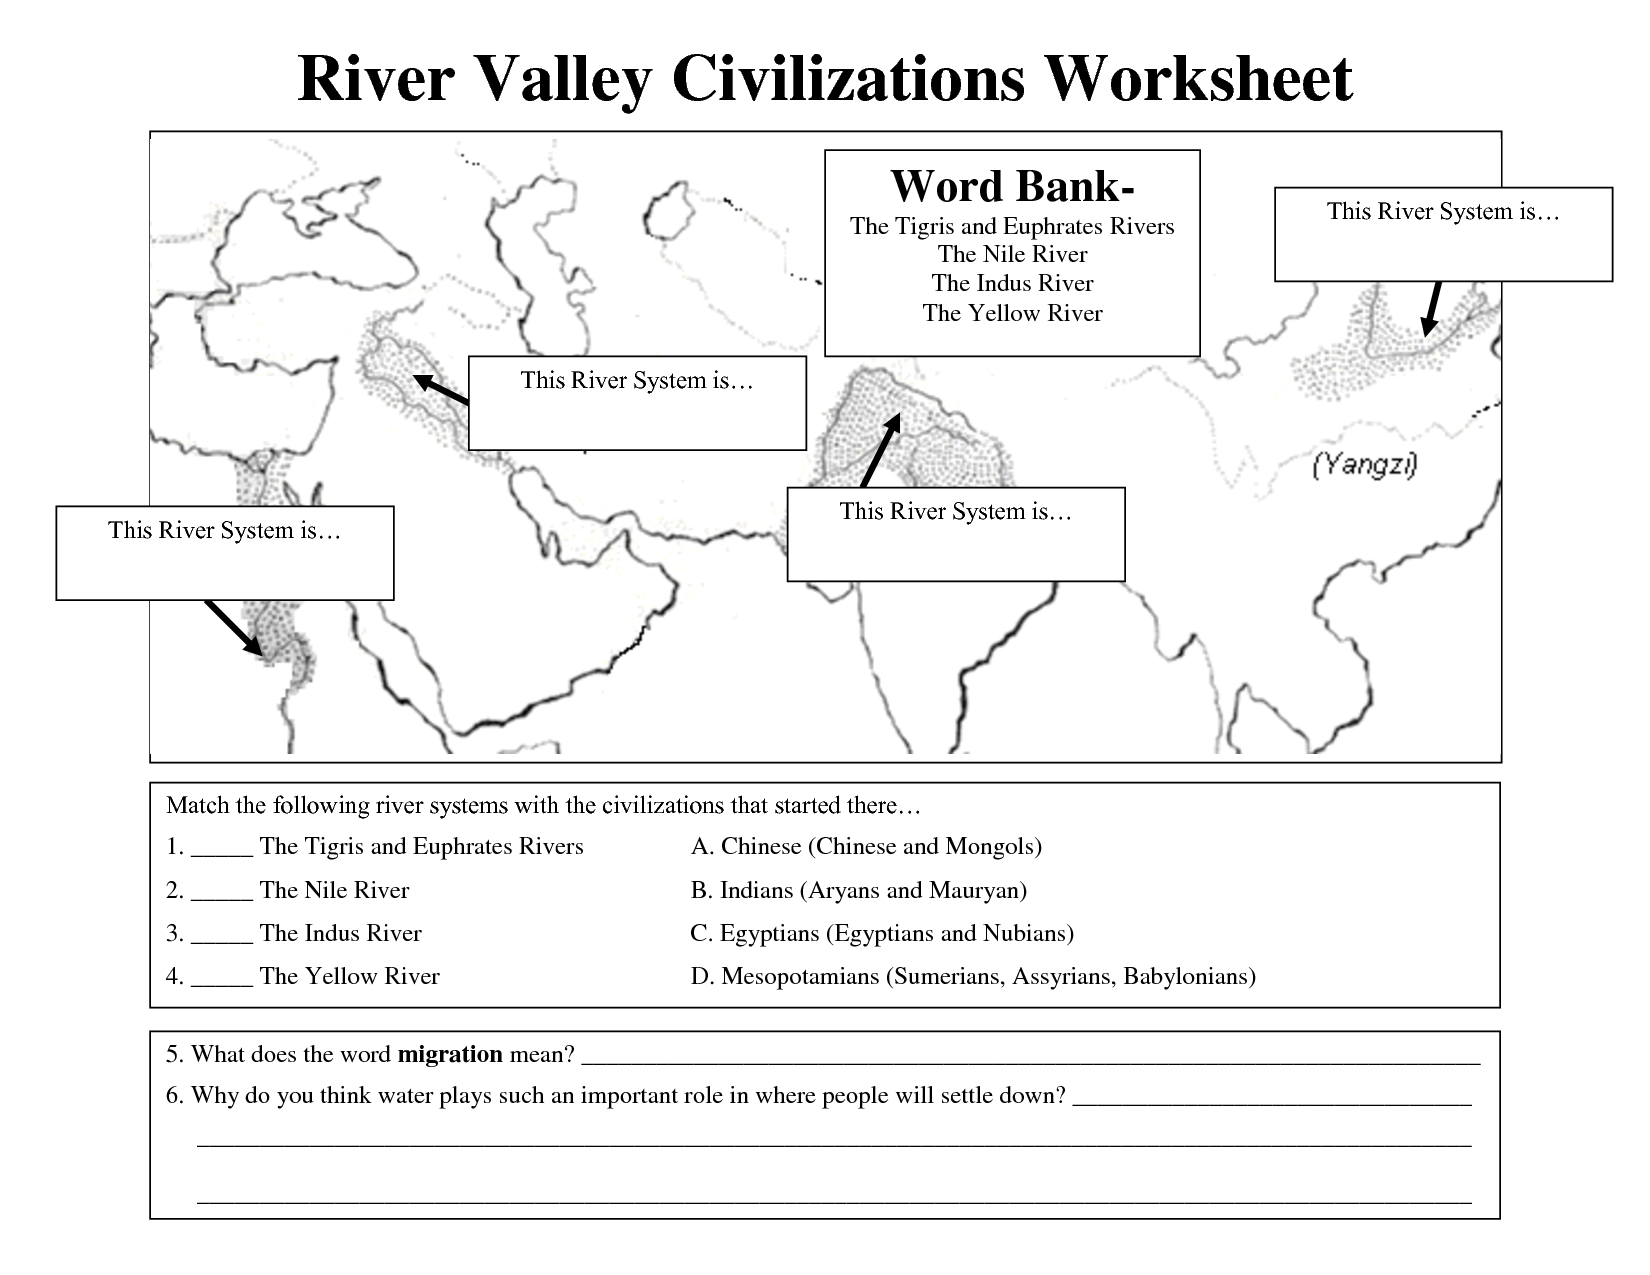 Early Civilizations Worksheet | River Valley Civilizations Worksheet | World History Printable Worksheets